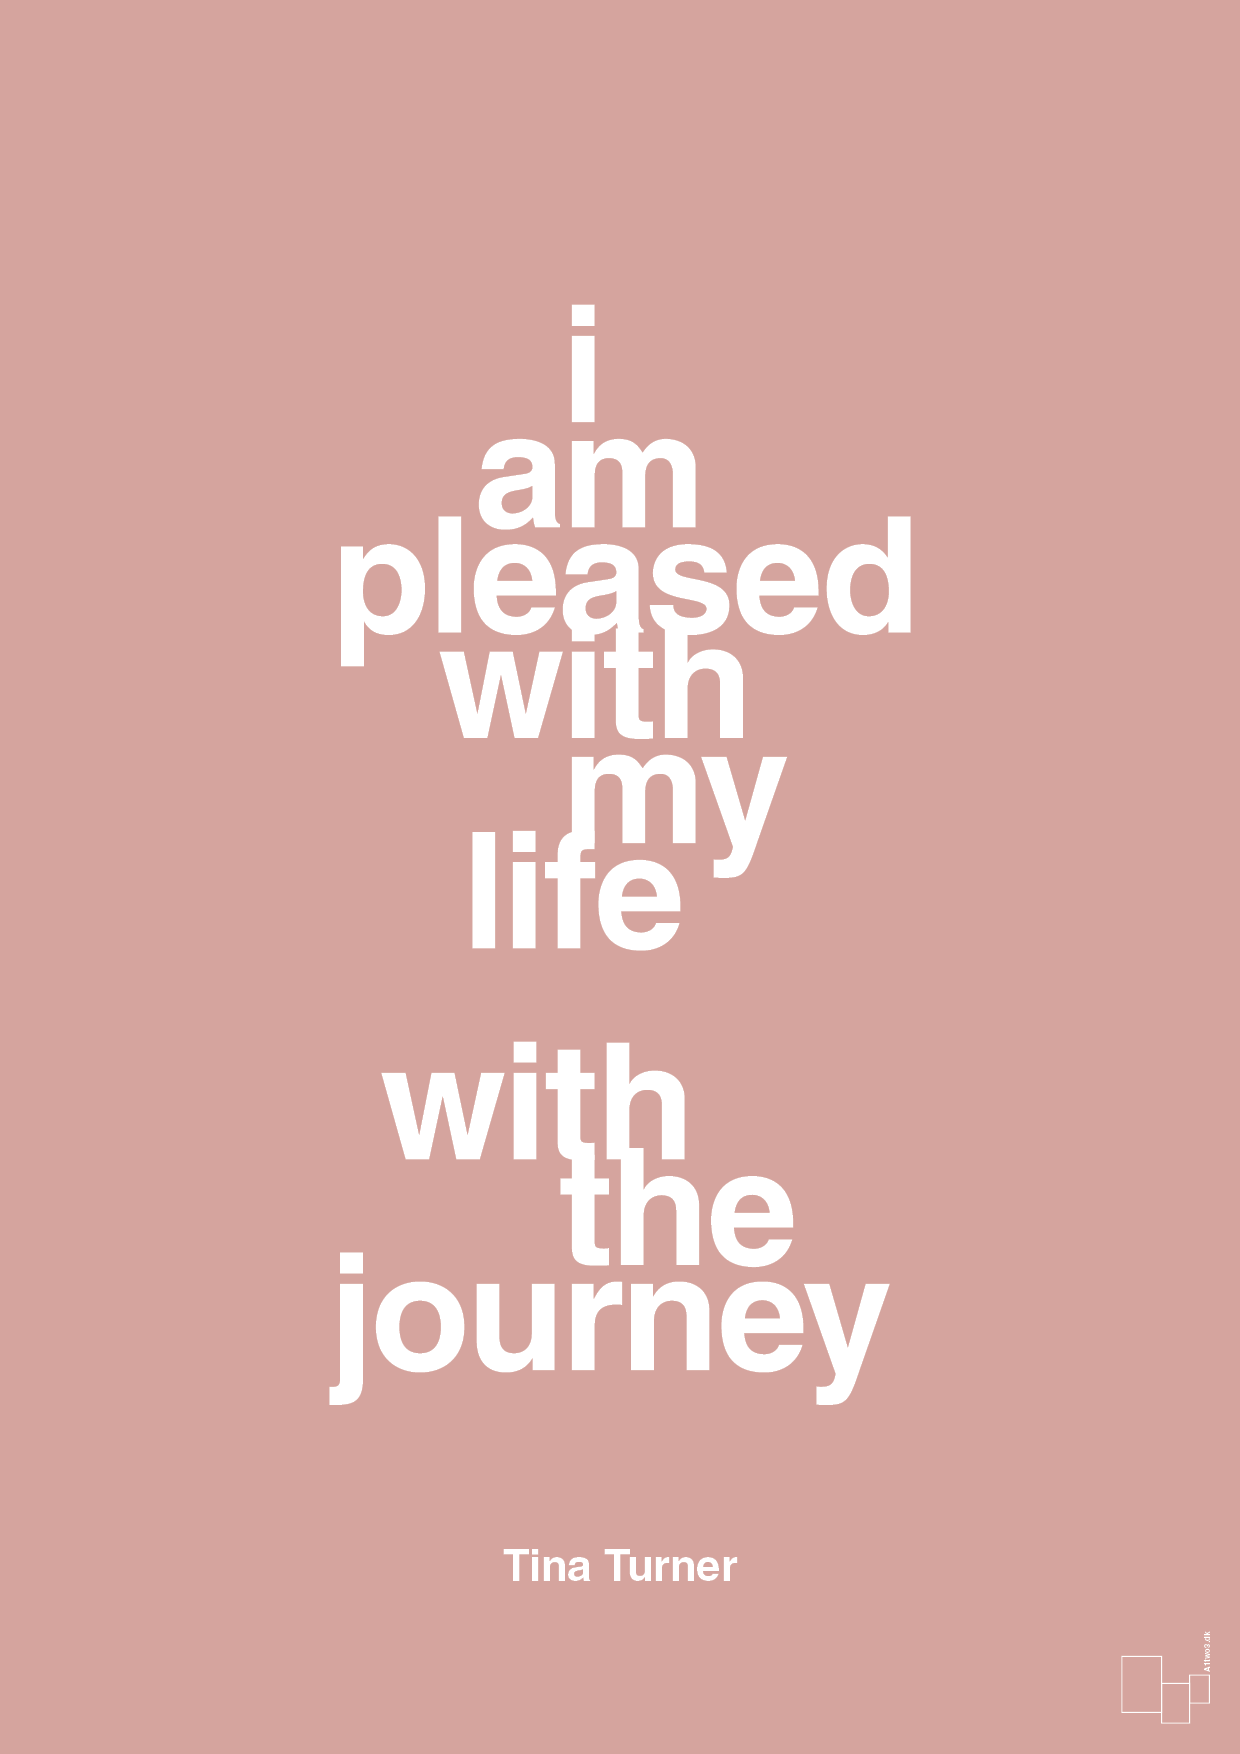 i am pleased with my life with the journey - Plakat med Citater i Bubble Shell